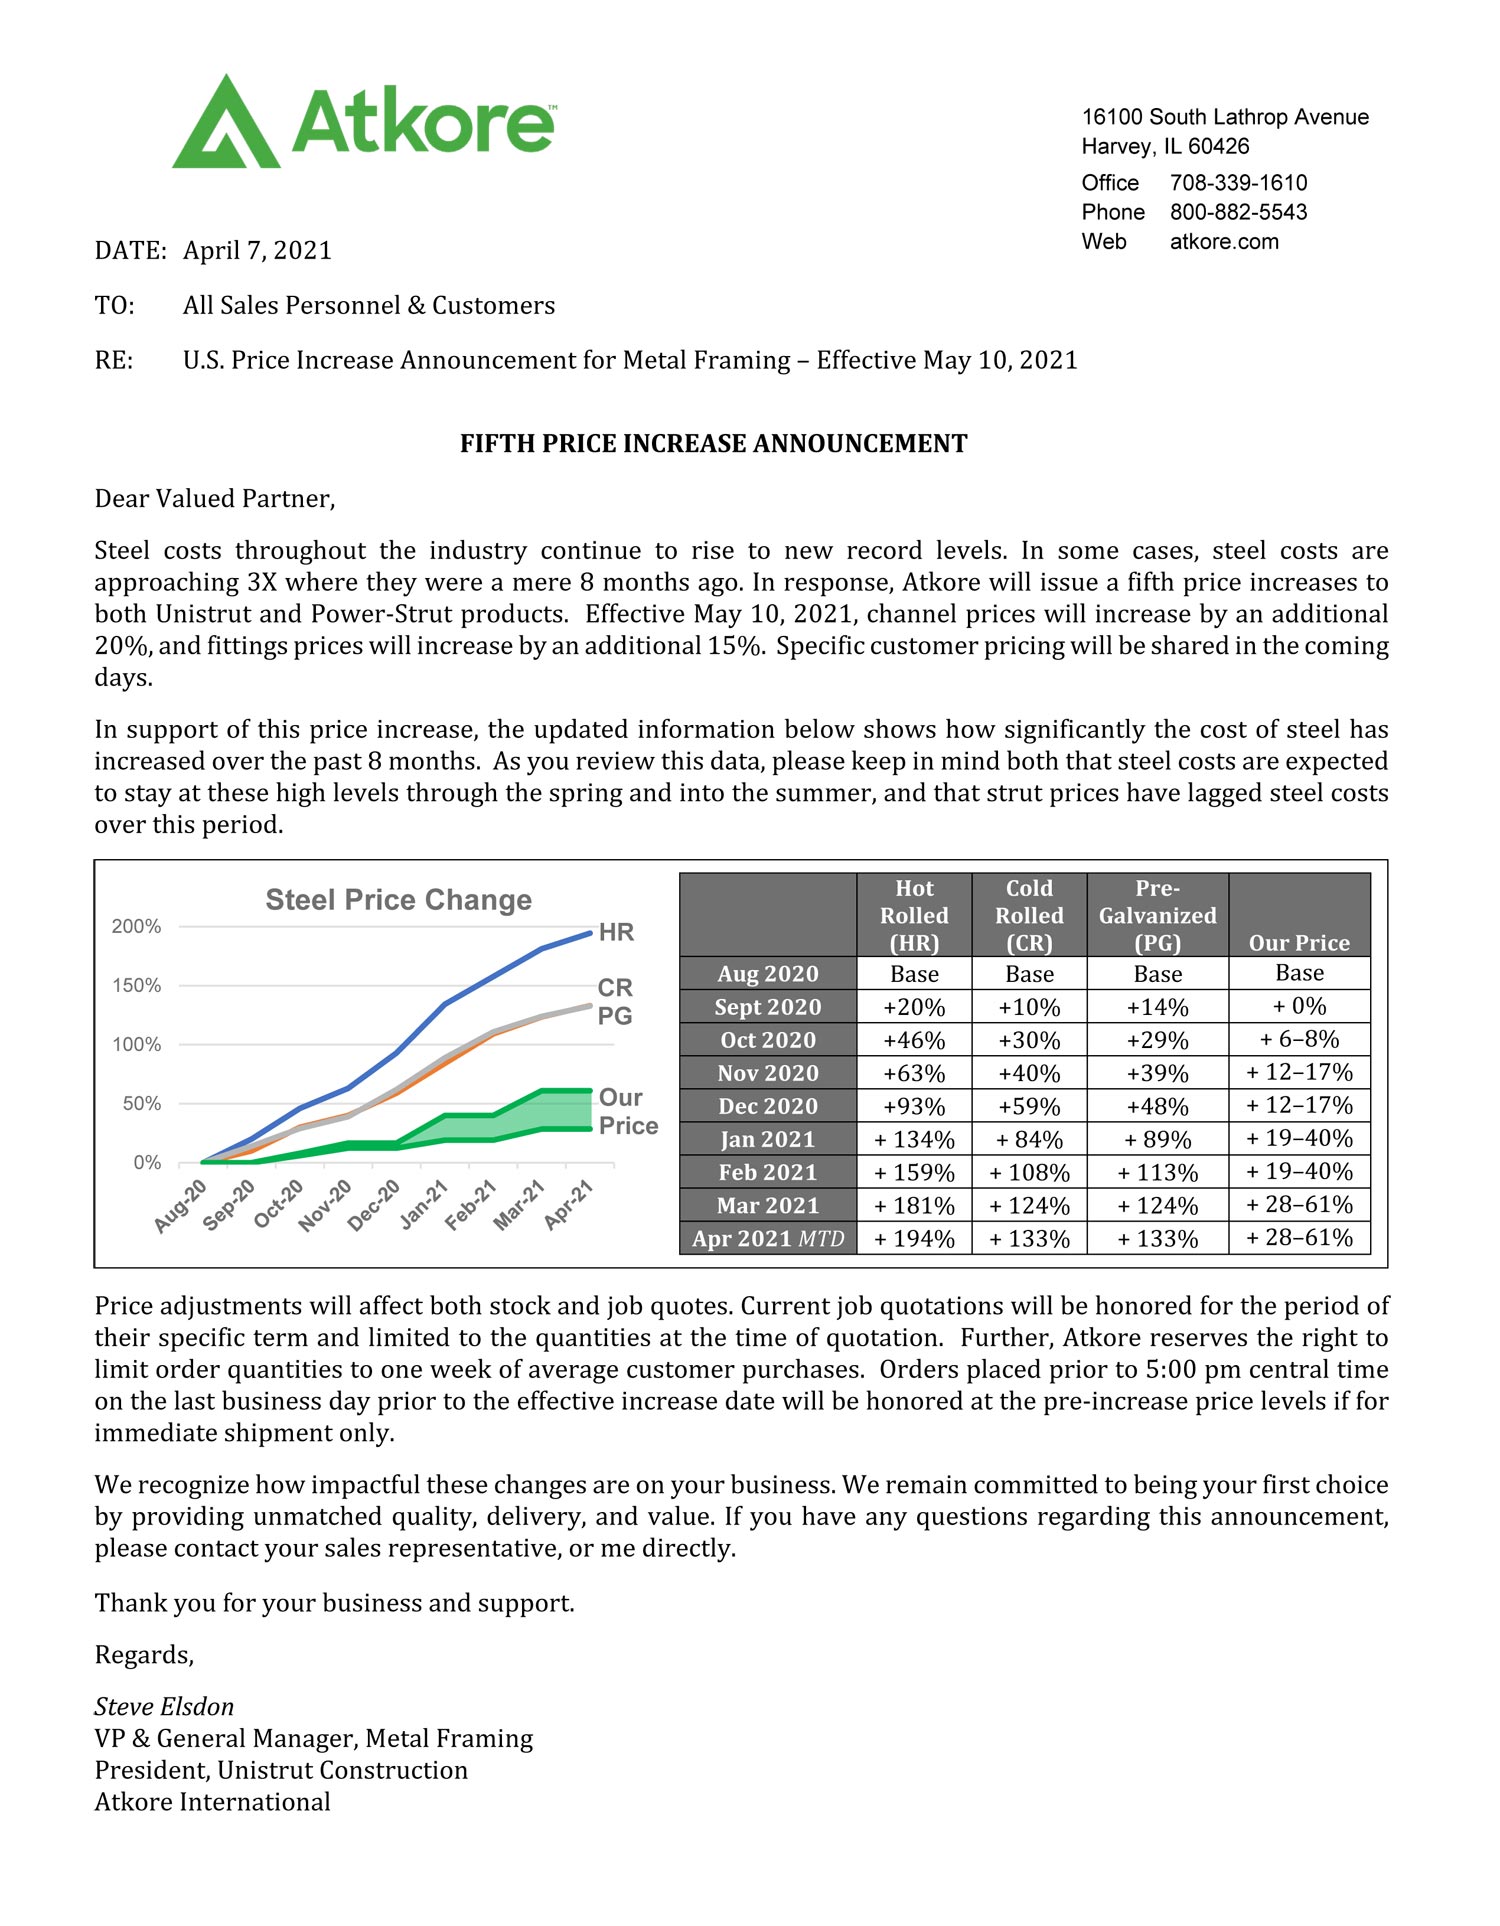 Atkore letter announcing price increase 5/10/2021, Unistrut Hawaii